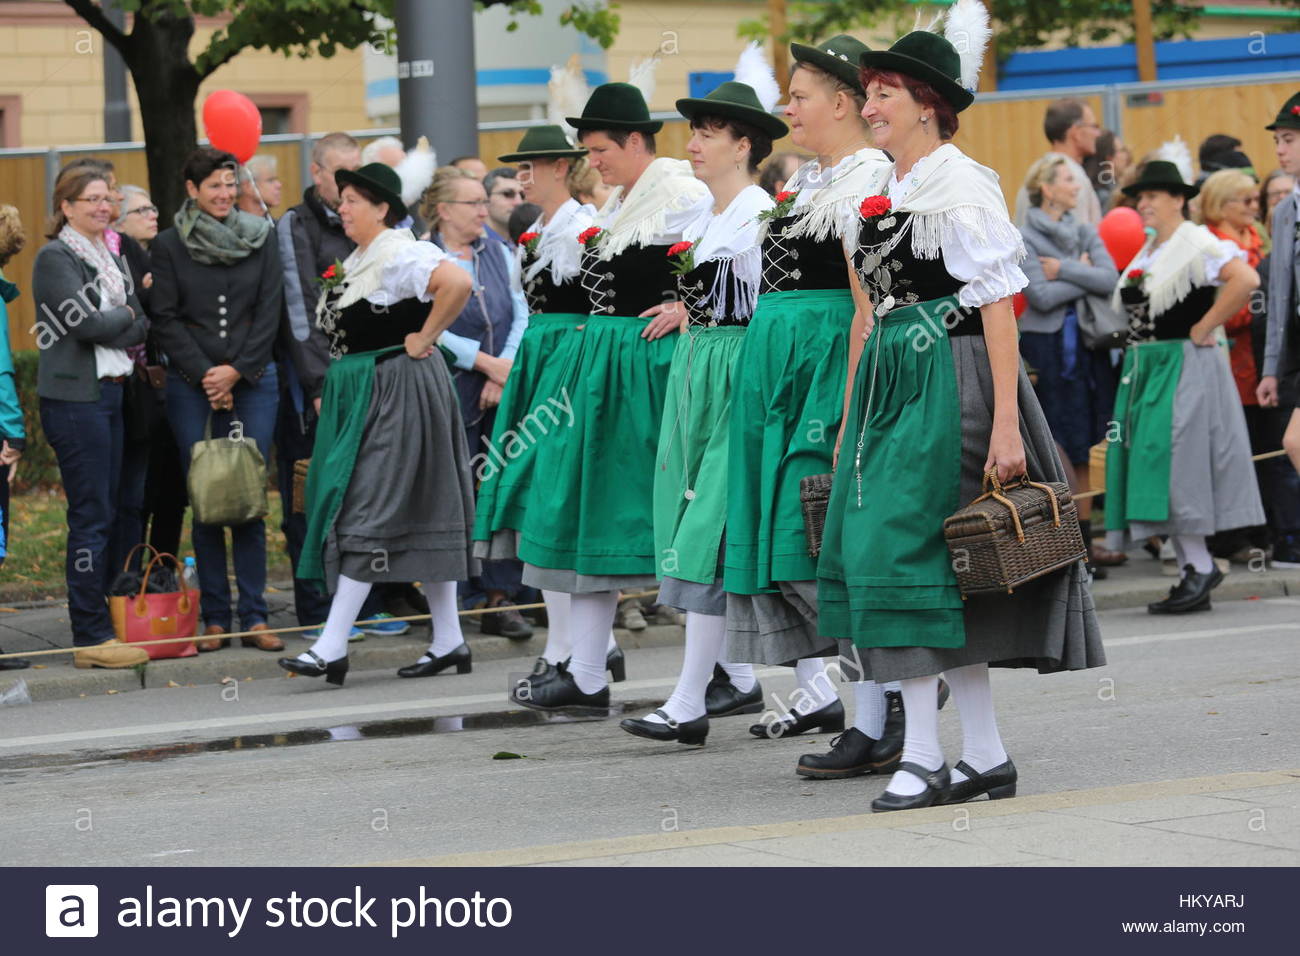 Women dressed in traditional dresses known as dirndls walk during the Oktoberfest parade. Stock Photo